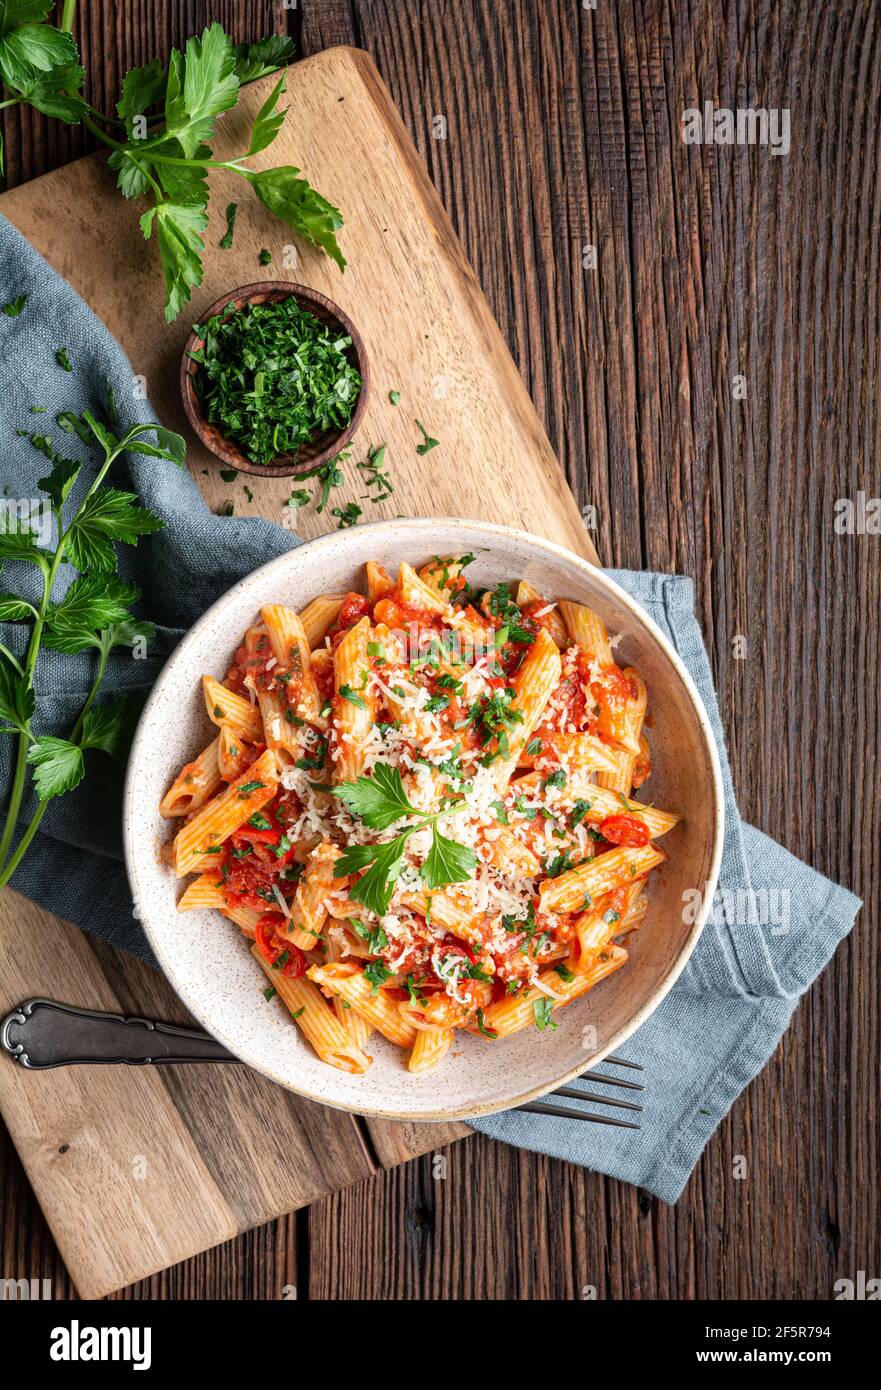 Classic penne all'Arabiata, spicy pasta with tomato and chilli sauce, topped with grated cheese on rustic wooden background Stock Photo